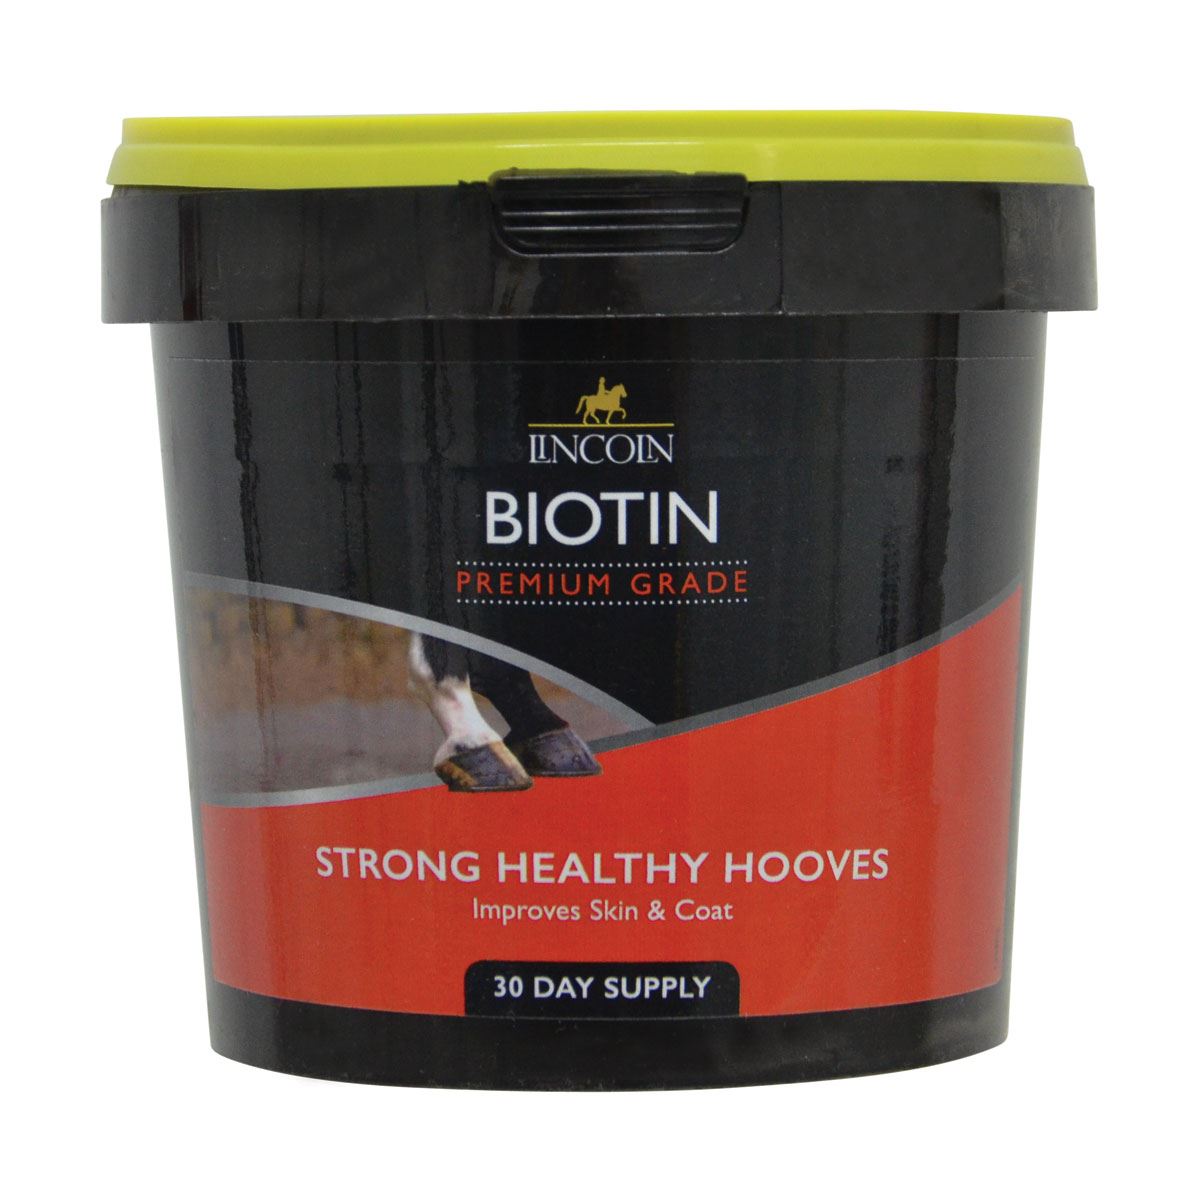 Lincoln Biotin - Just Horse Riders